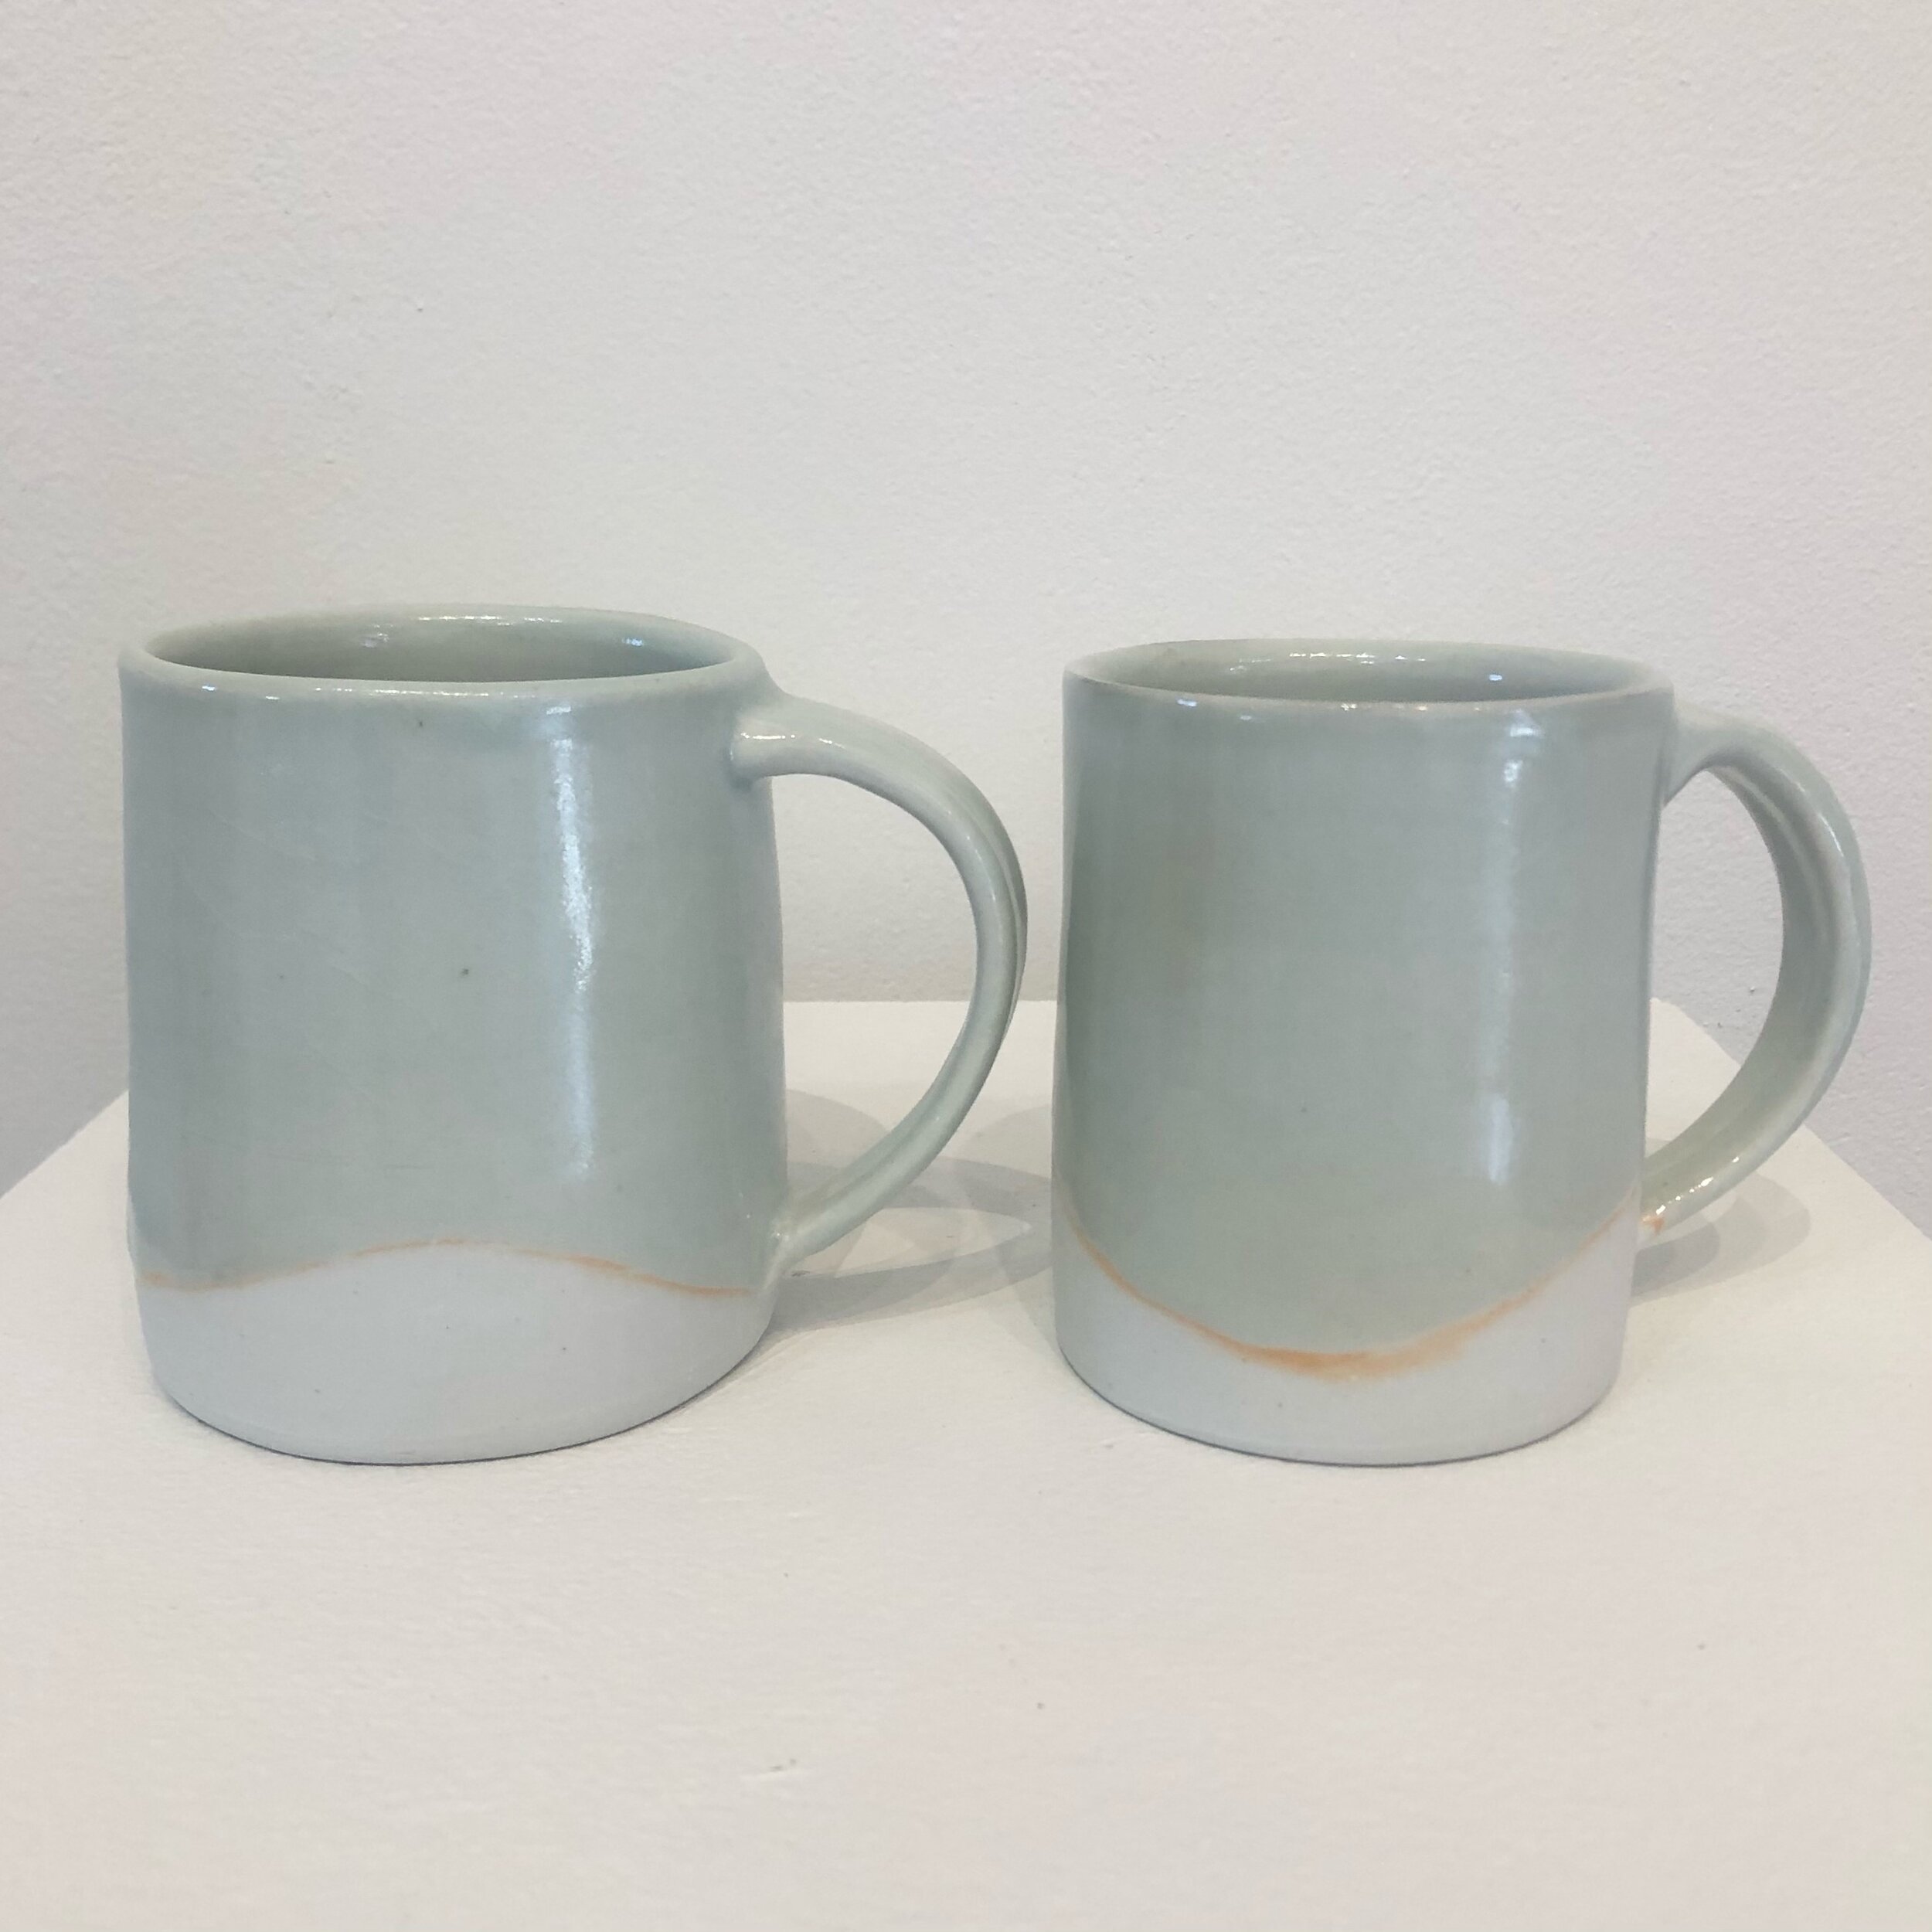  Porcelain mugs with ice trap glaze 4” tall SOLD 